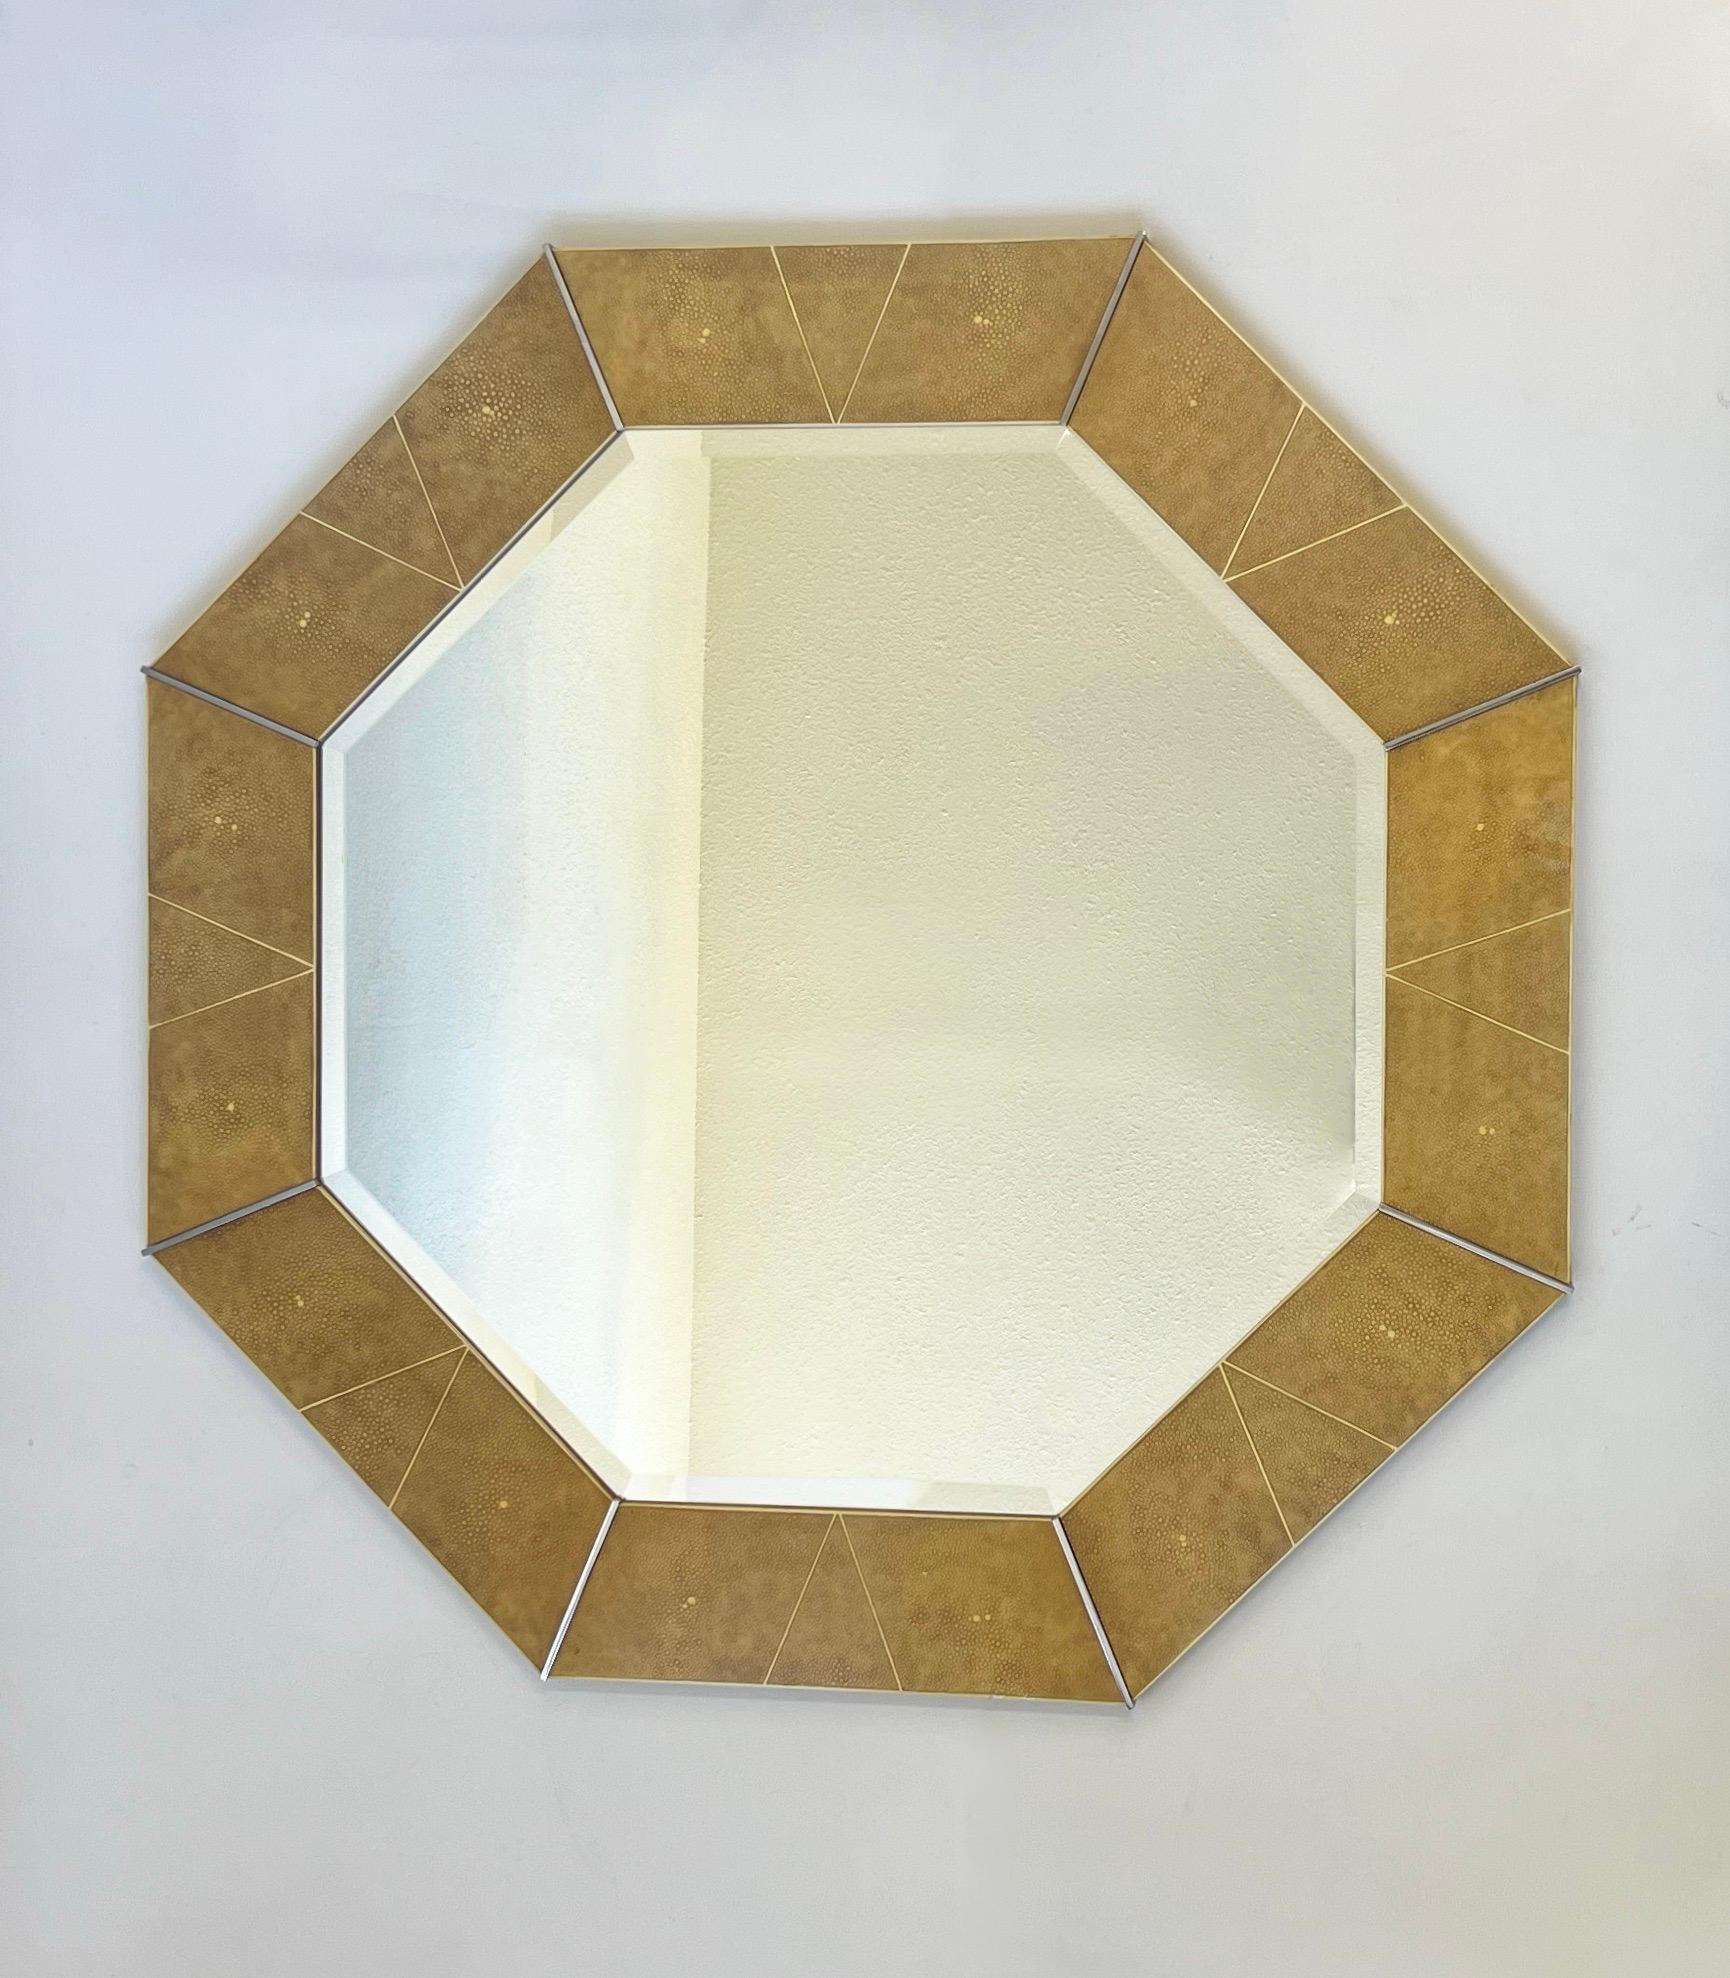 Late 20th Century Octagonal Shagreen Lacquer and Chrome Mirror by Karl Springer for Suzanne Sumers For Sale